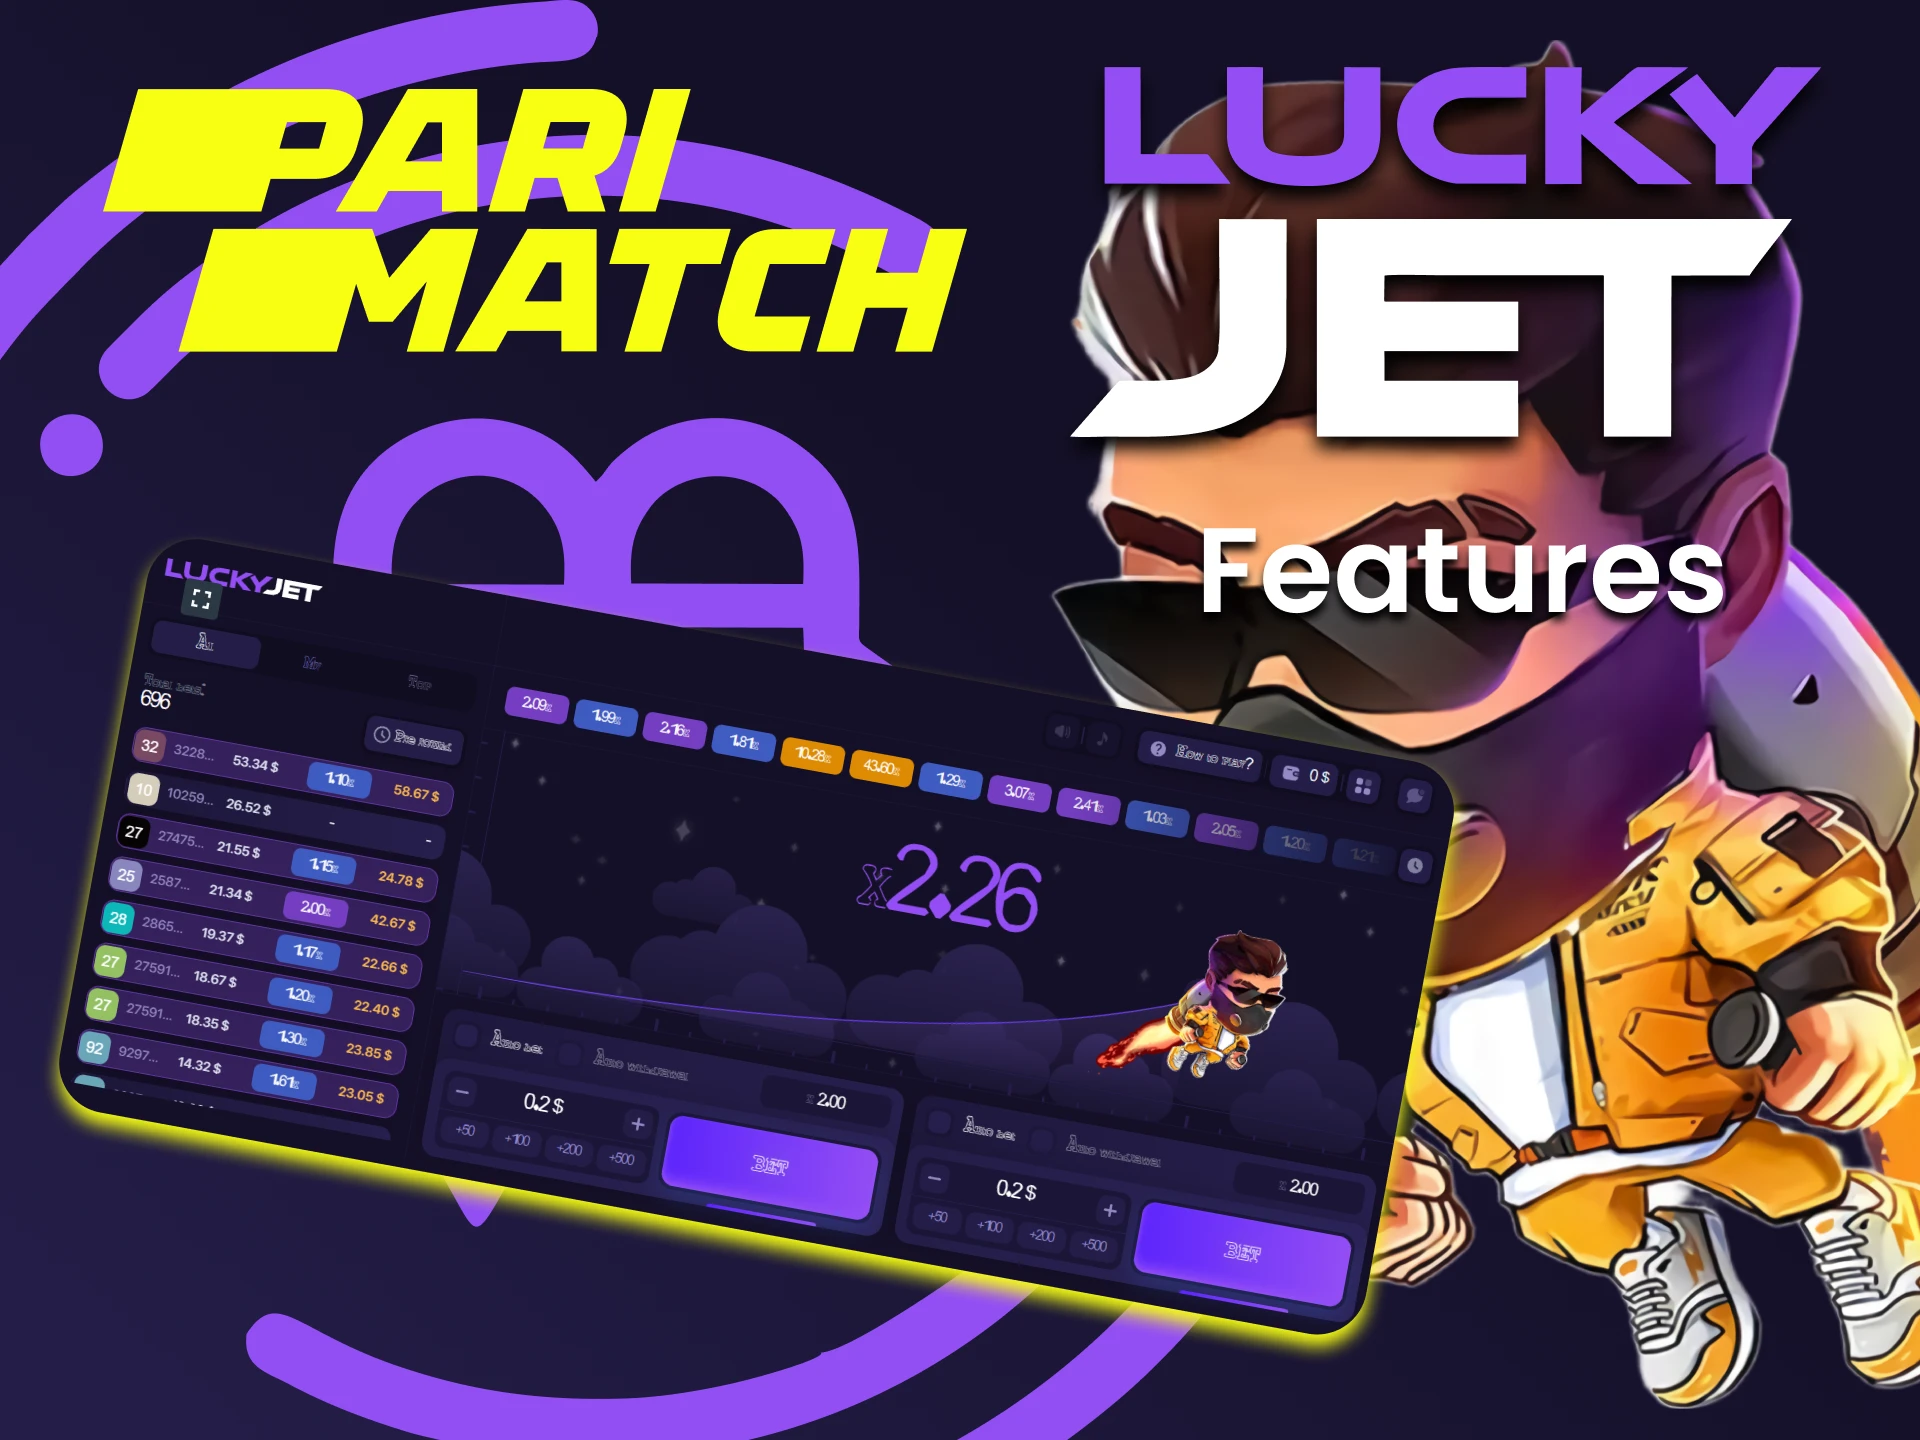 Find out about future improvements to Lucky Jet at Parimatch.